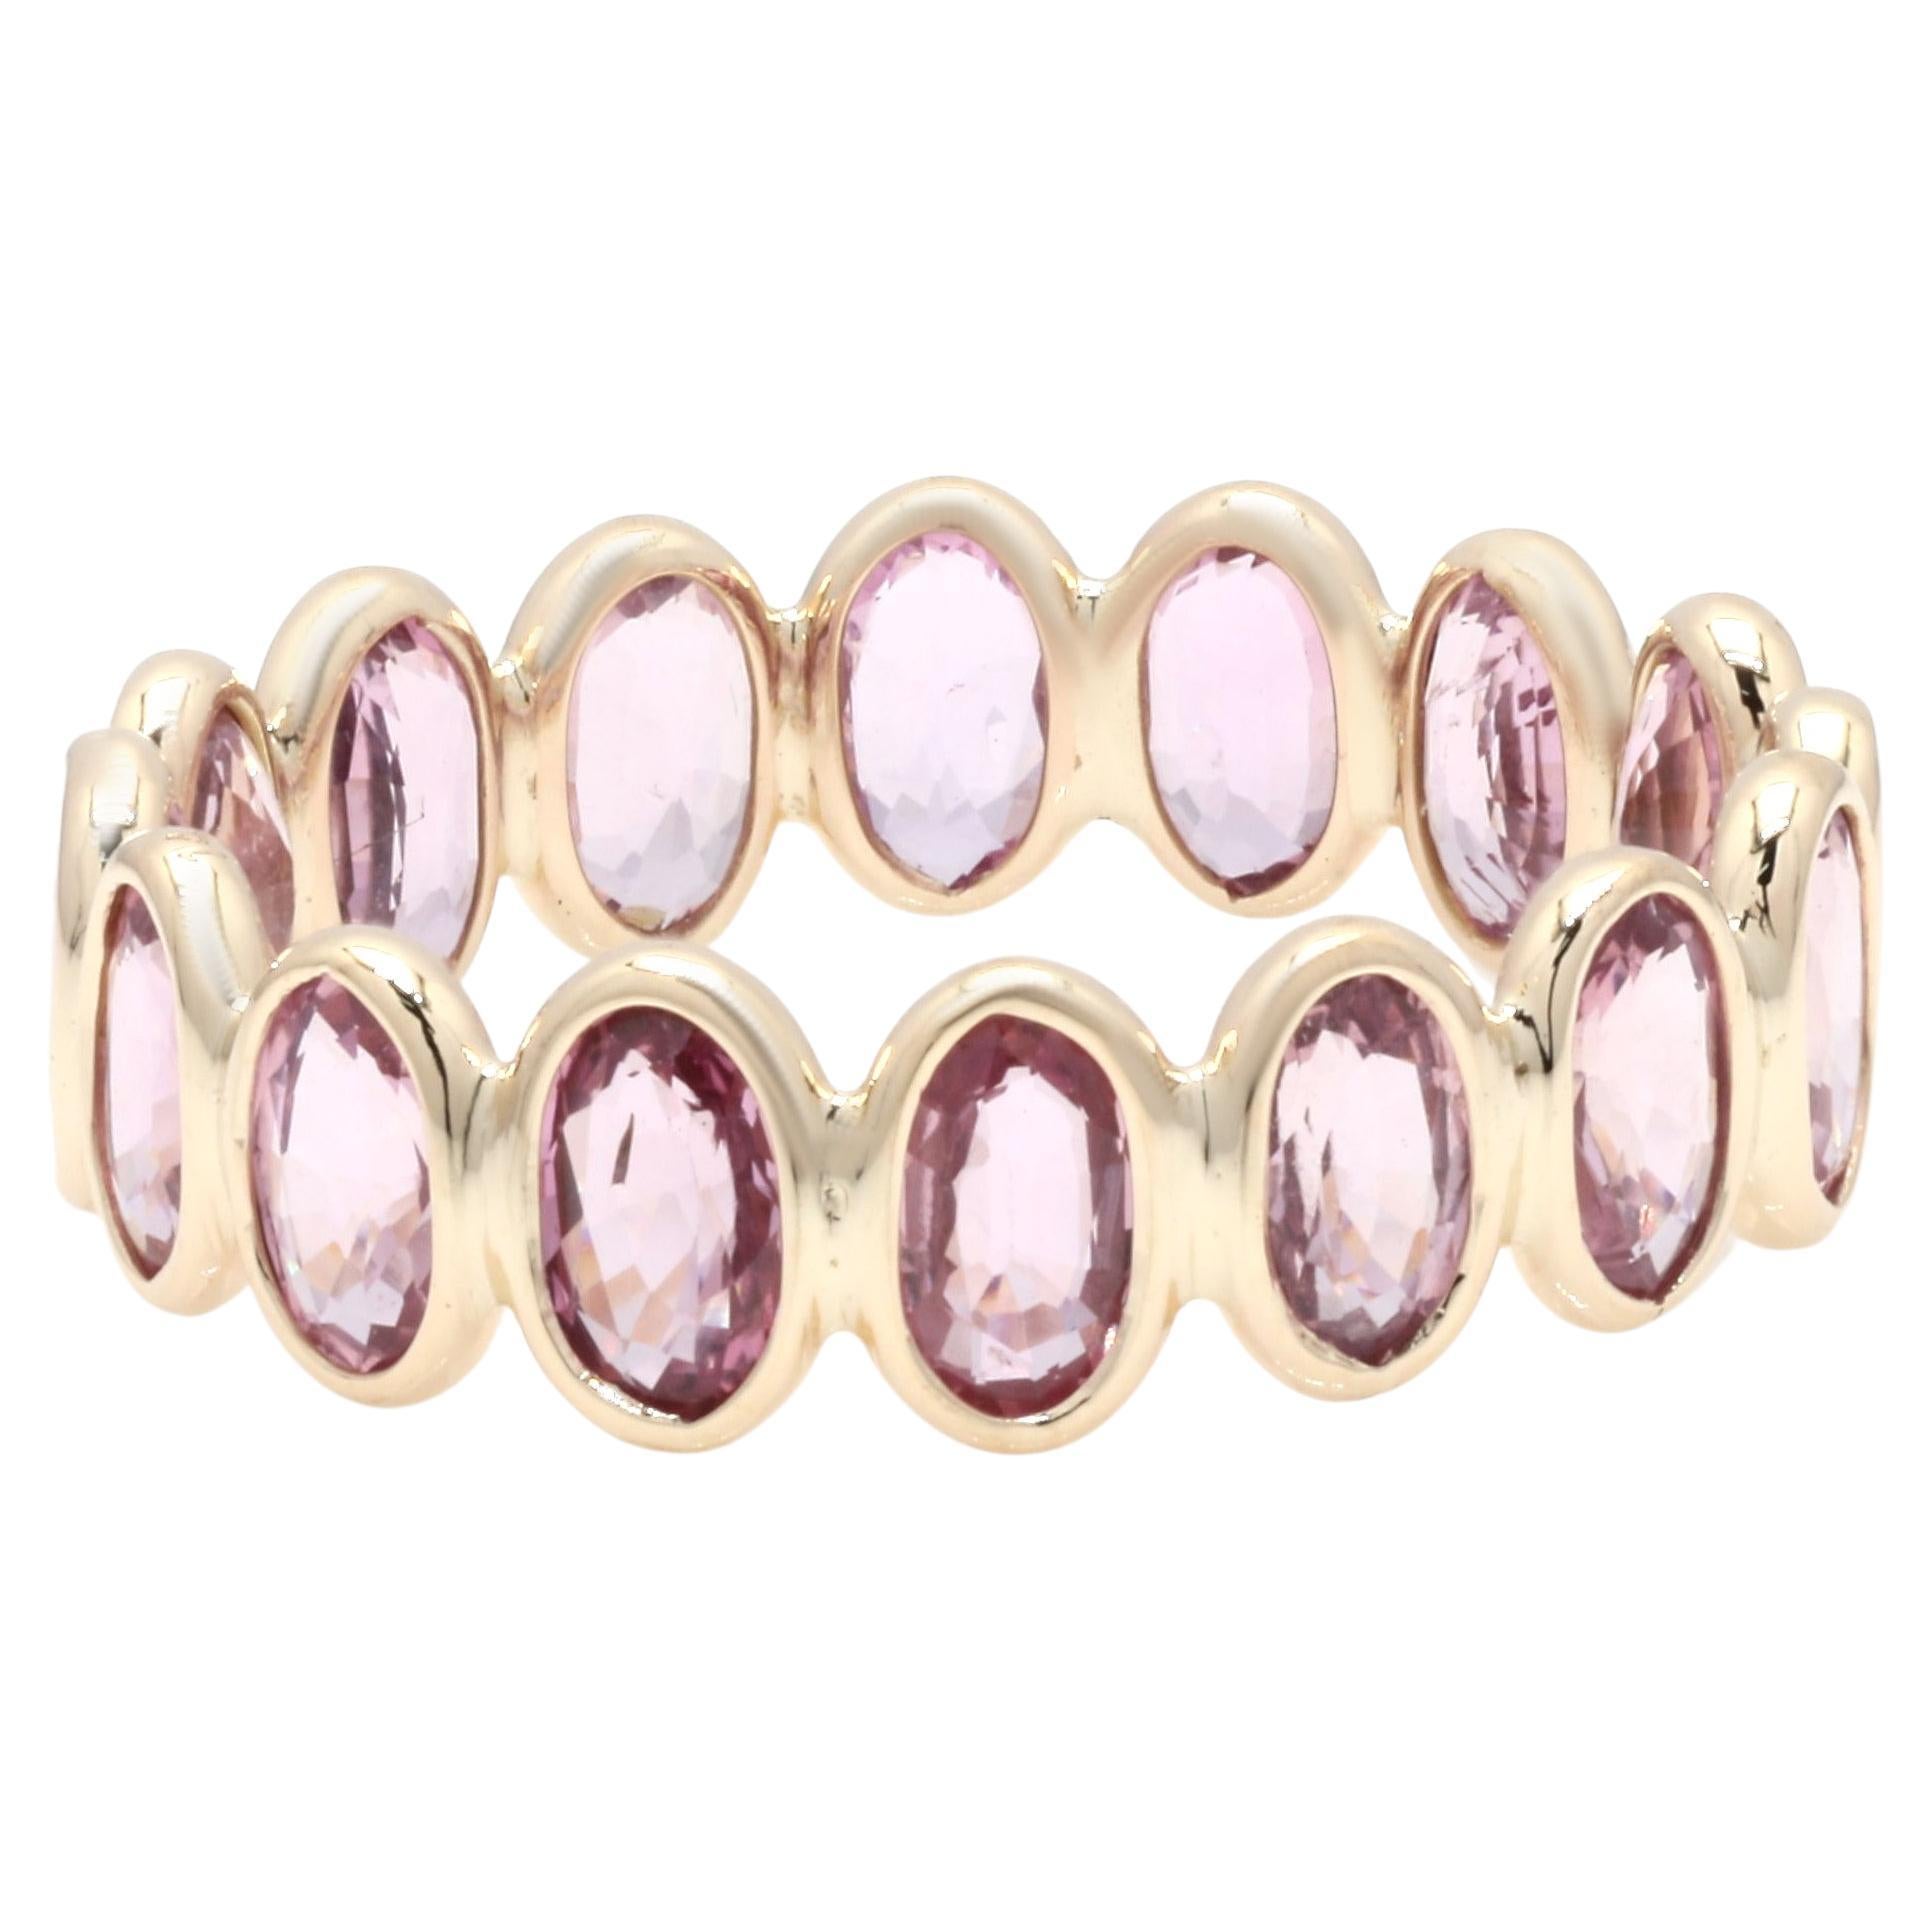 Handmade 4.47 Ct Oval Pink Sapphire Birthstone Eternity Ring in 14K Yellow Gold